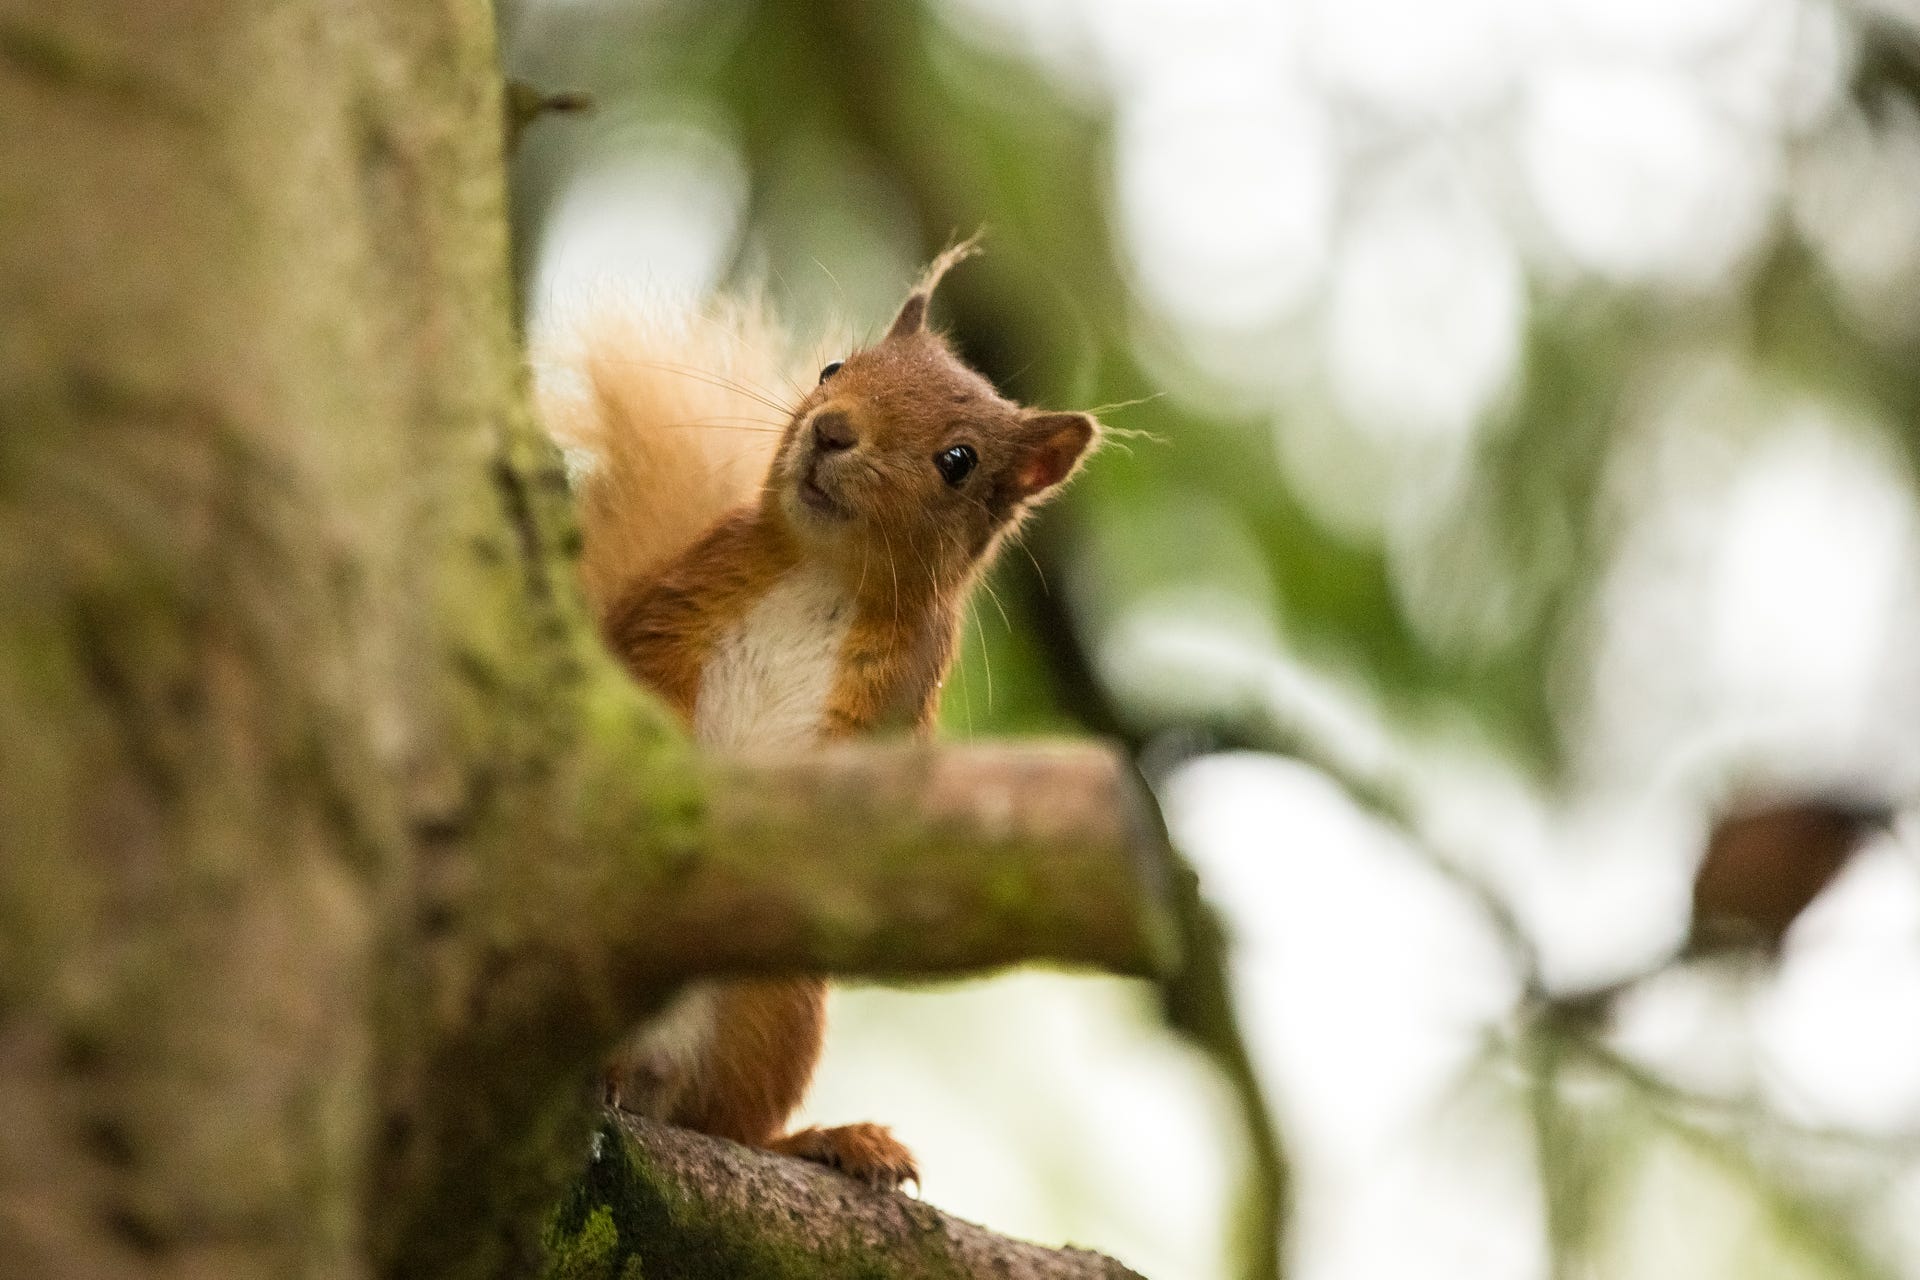 I'm pleased to have caught this cute red squirrel poking his head out from around a tree.